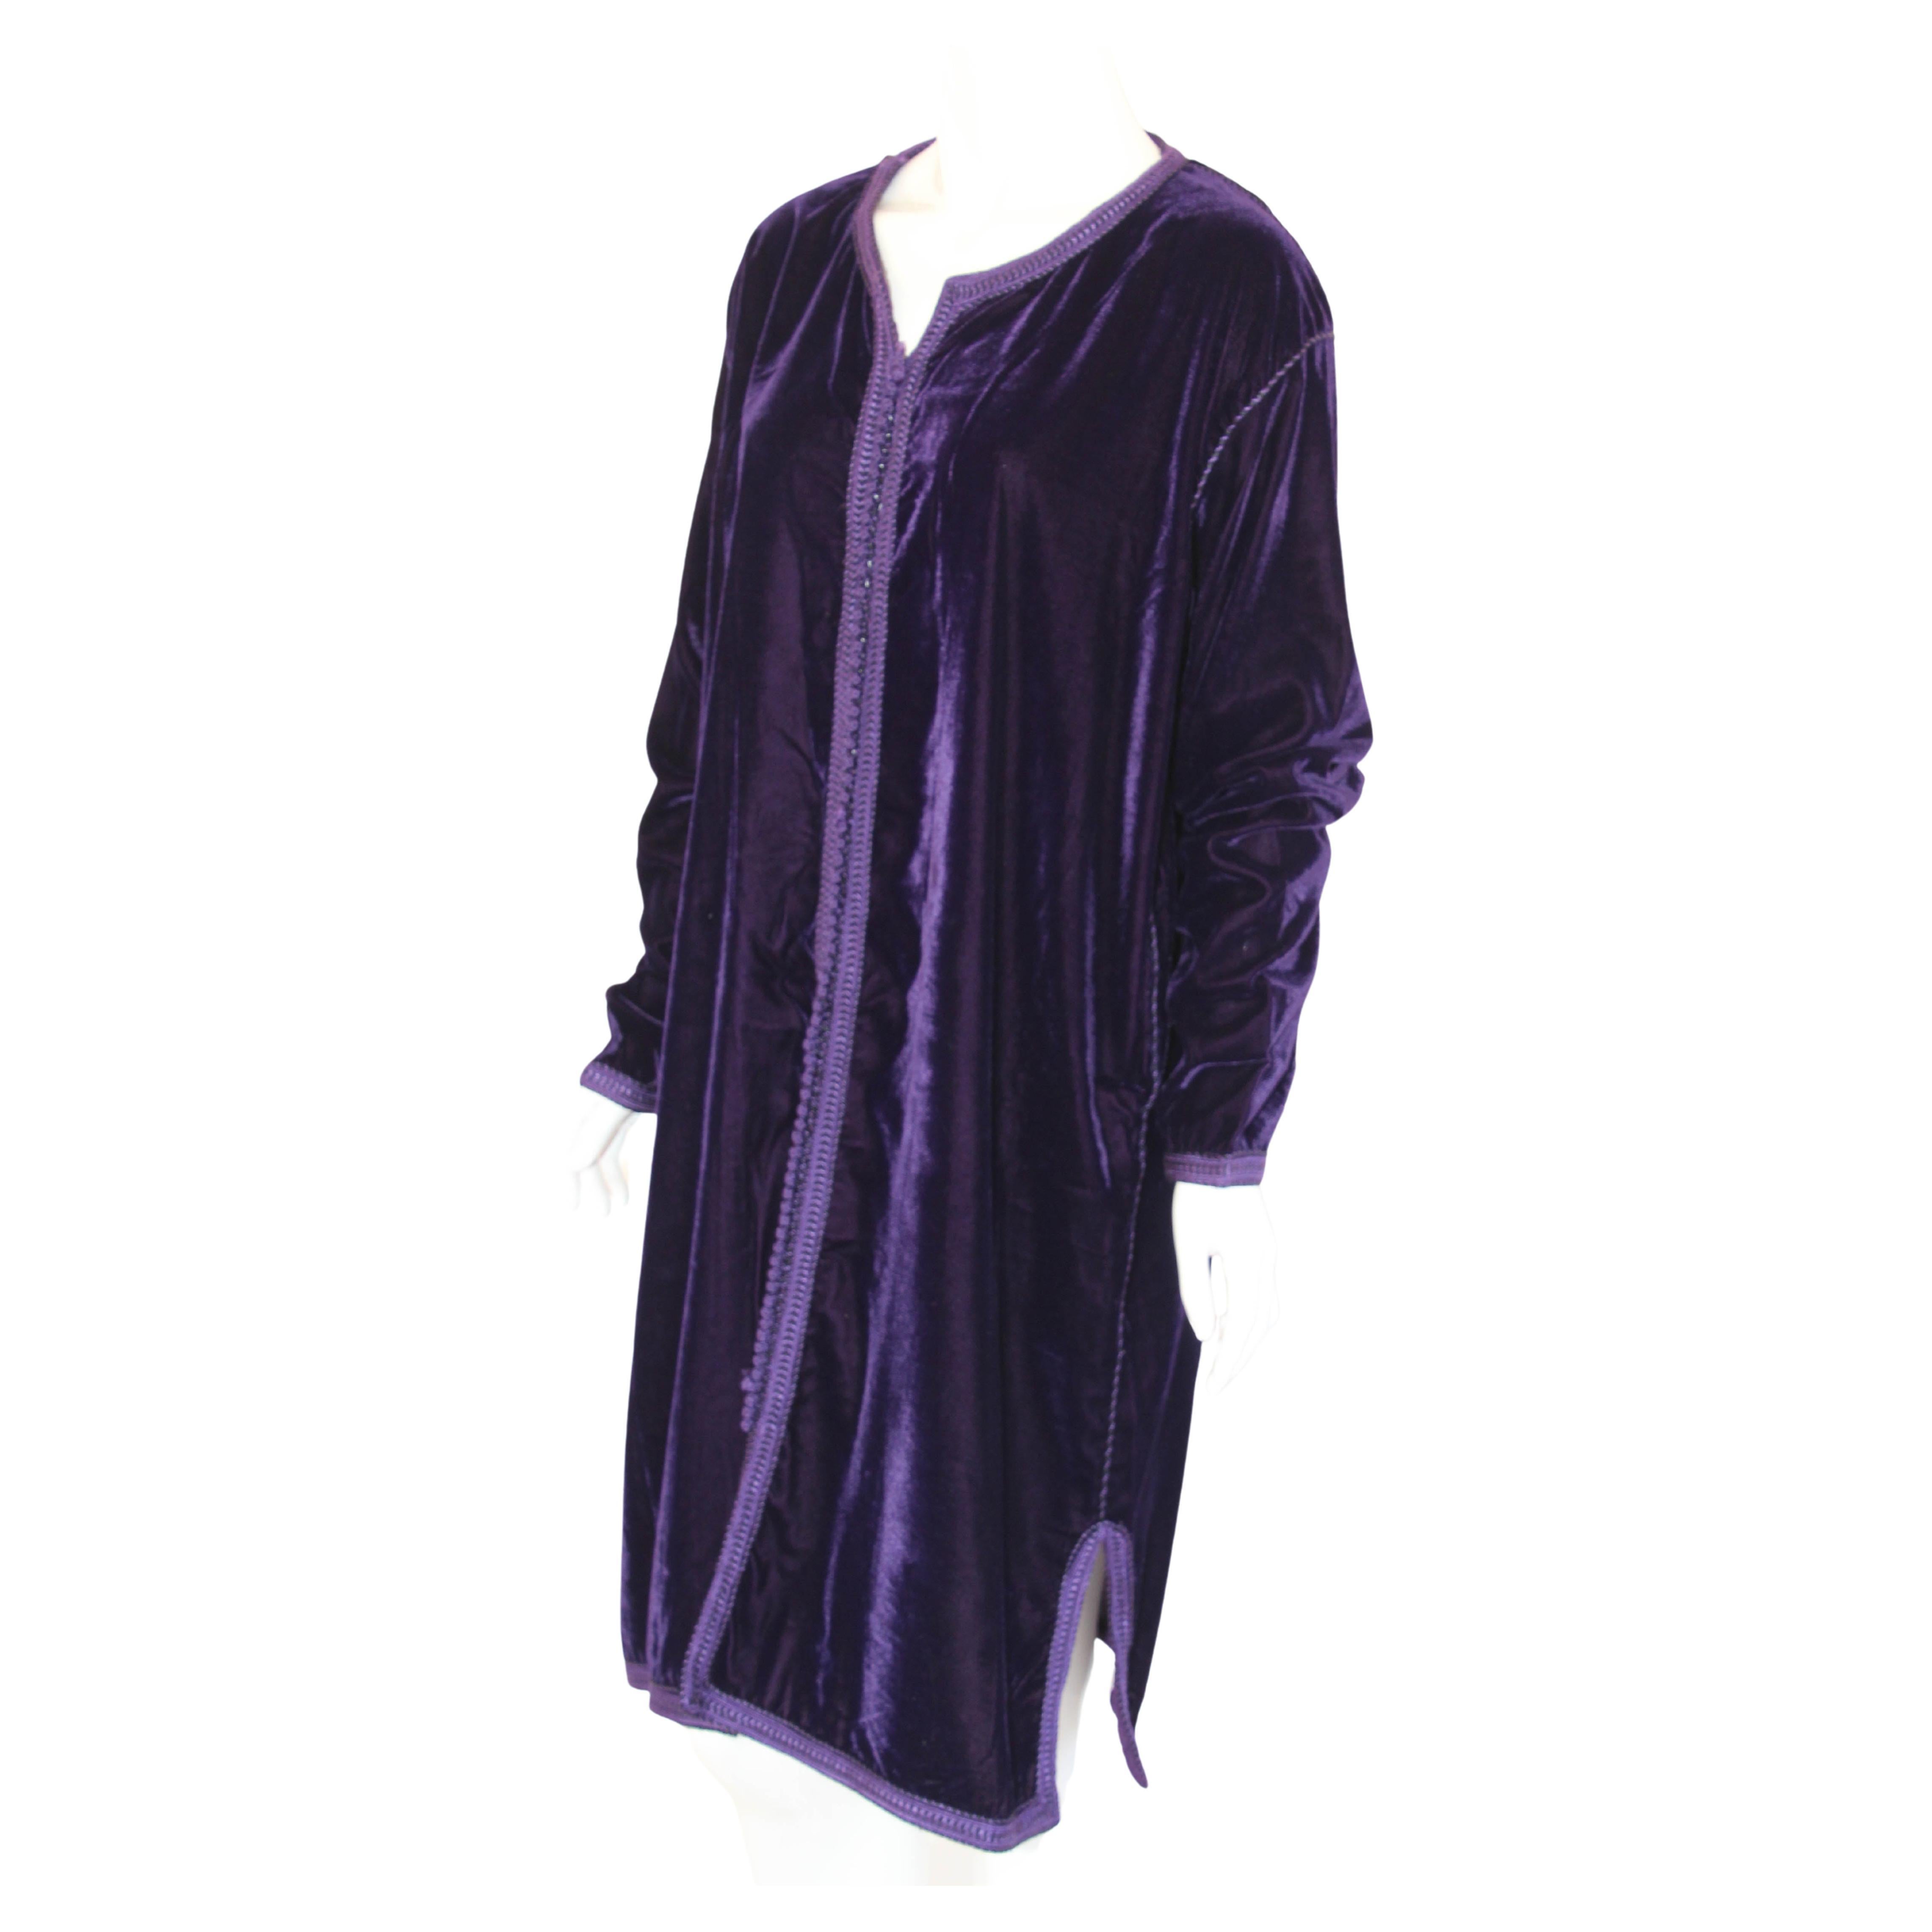 Elegant Moroccan caftan purple velvet embroidered.
circa 1960s.
This velvet dress vest kaftan is embroidered and embellished entirely by hand.
One of a kind  Moroccan Moorish Middle Eastern dress.
The kaftan features a traditional neckline.
In